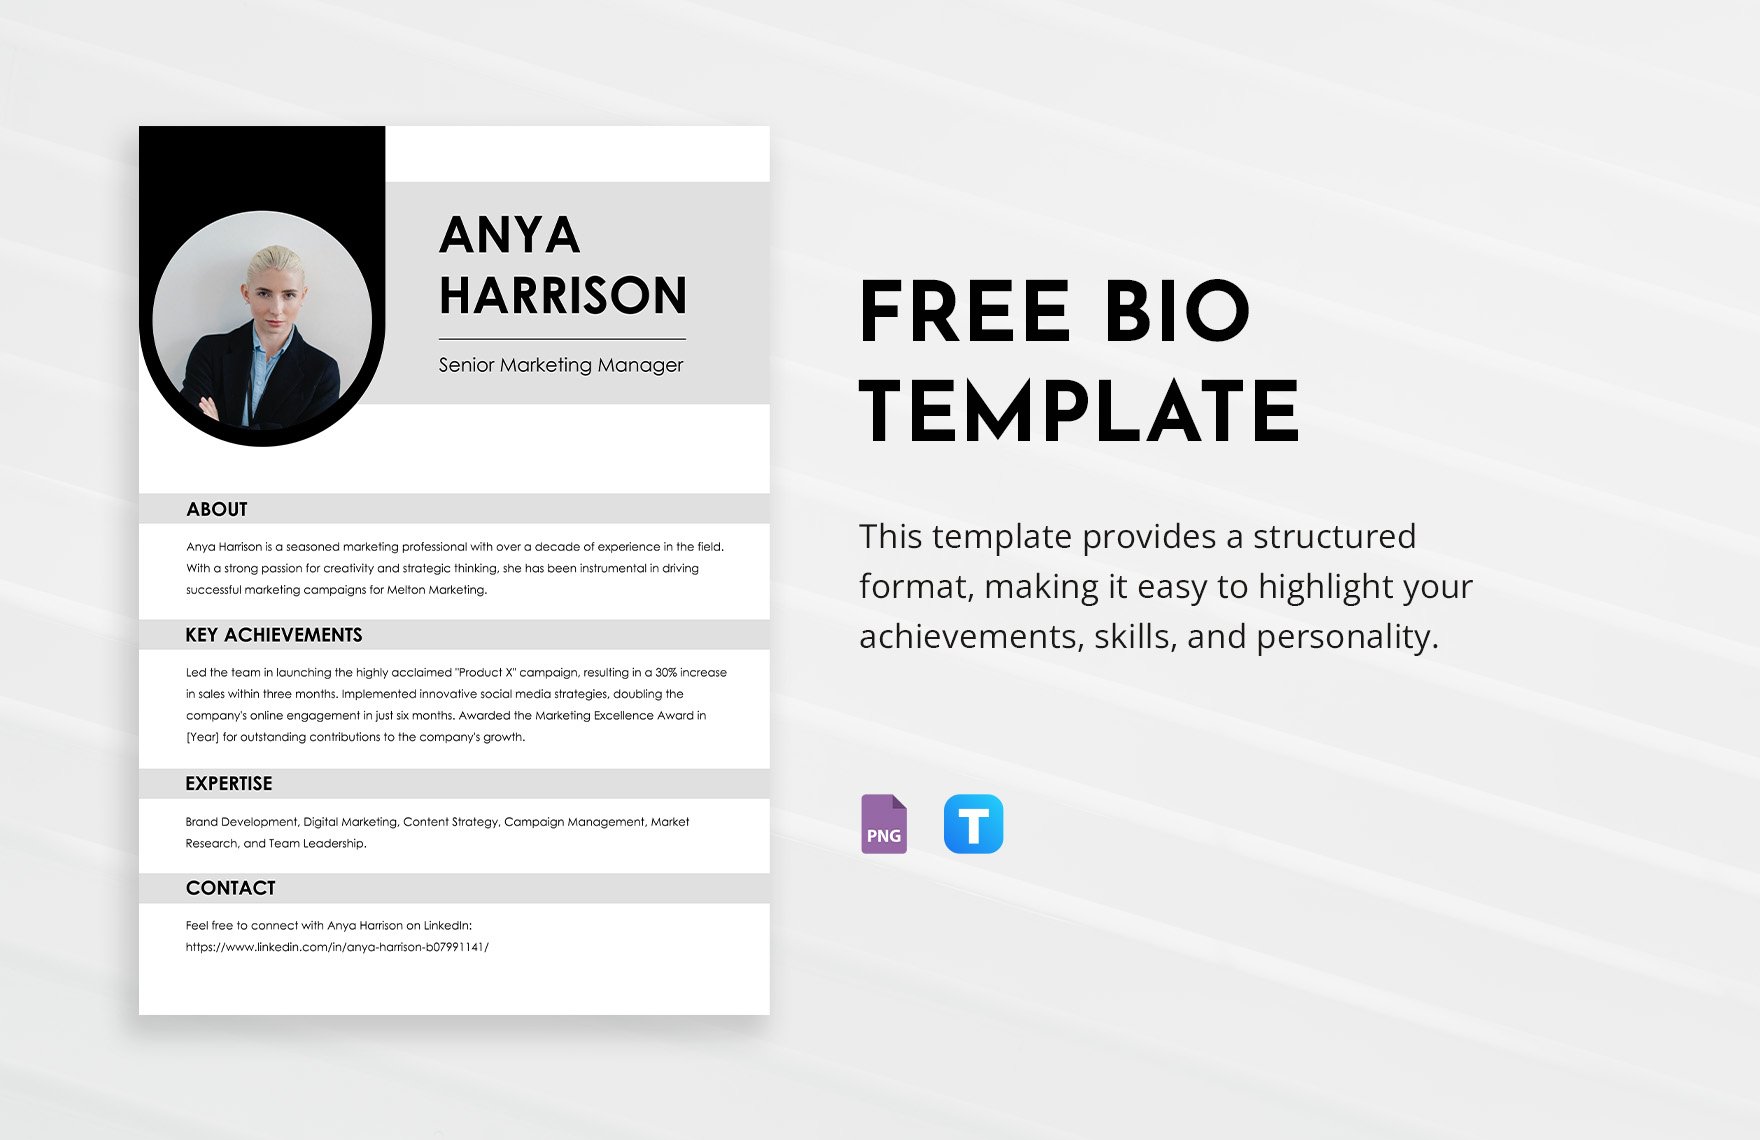 Free Bio Template in PNG